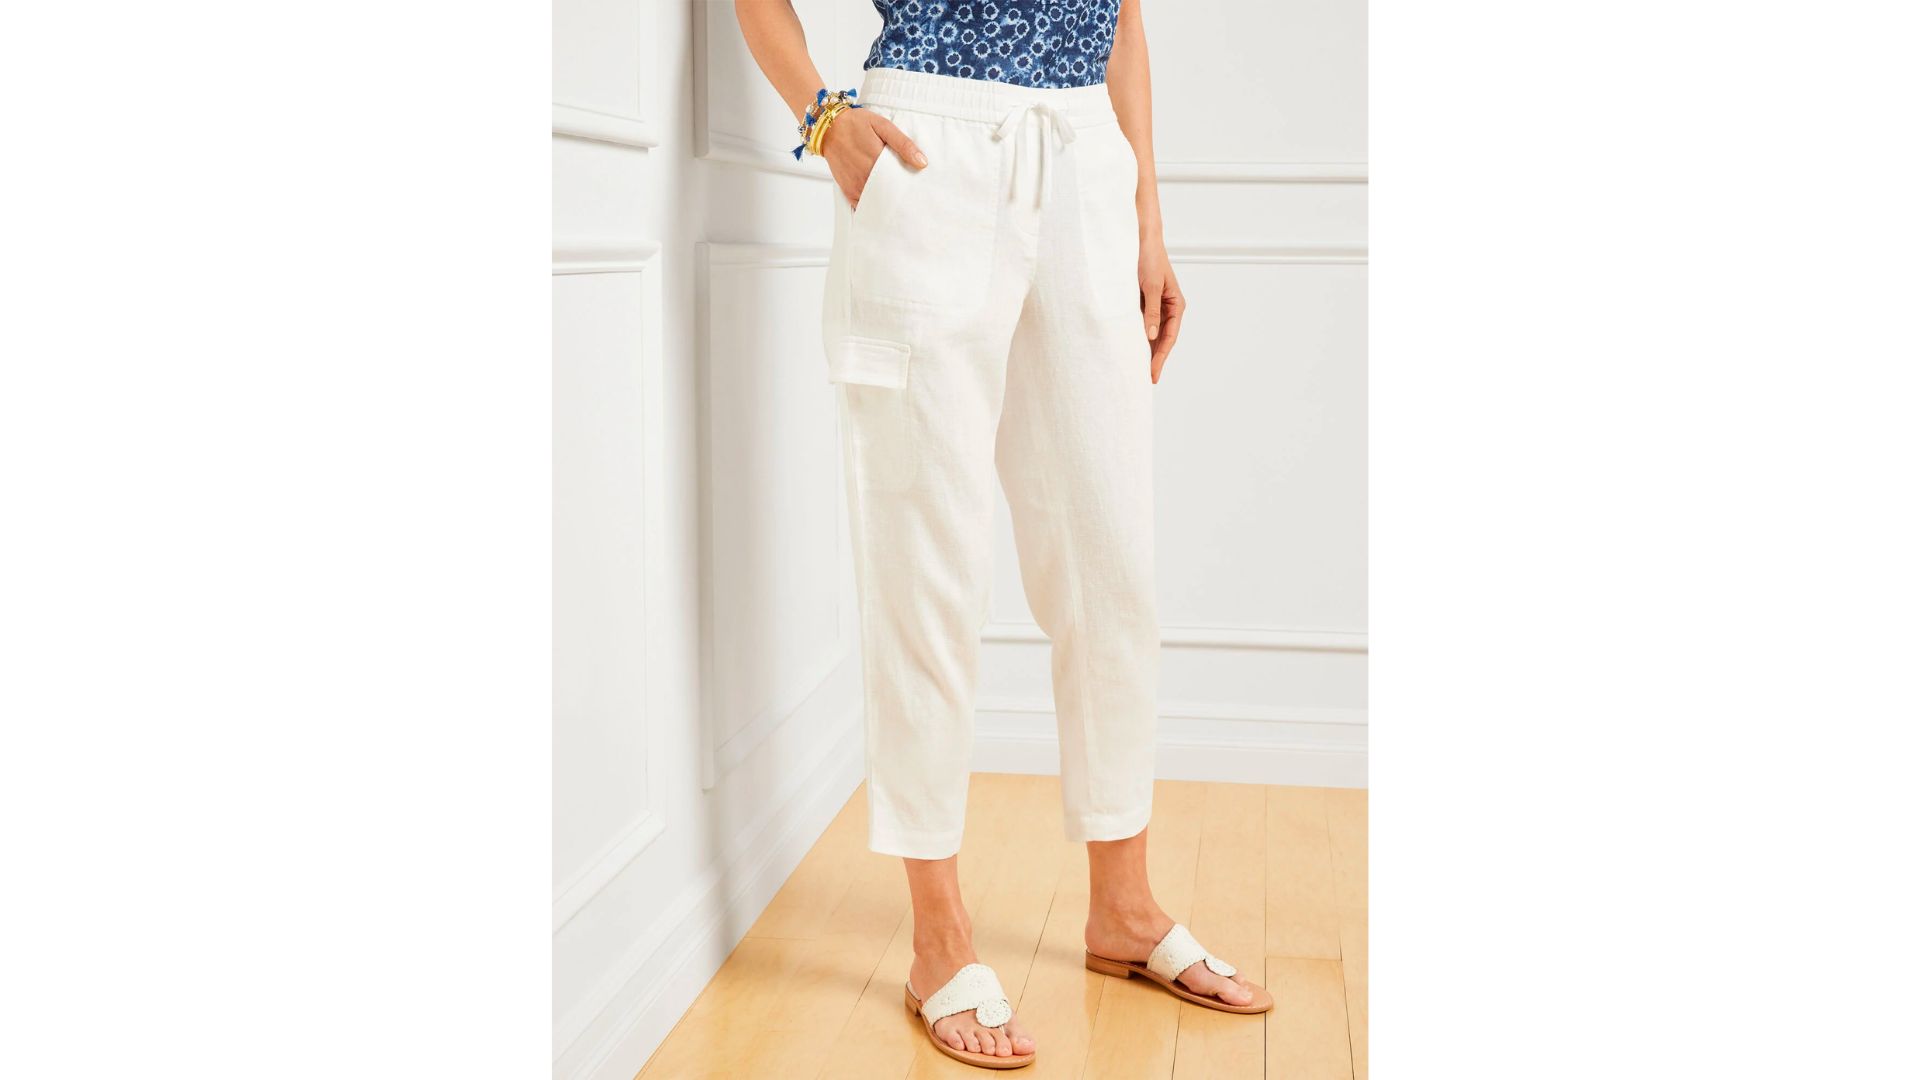 Classic Women's Clothing at Talbots